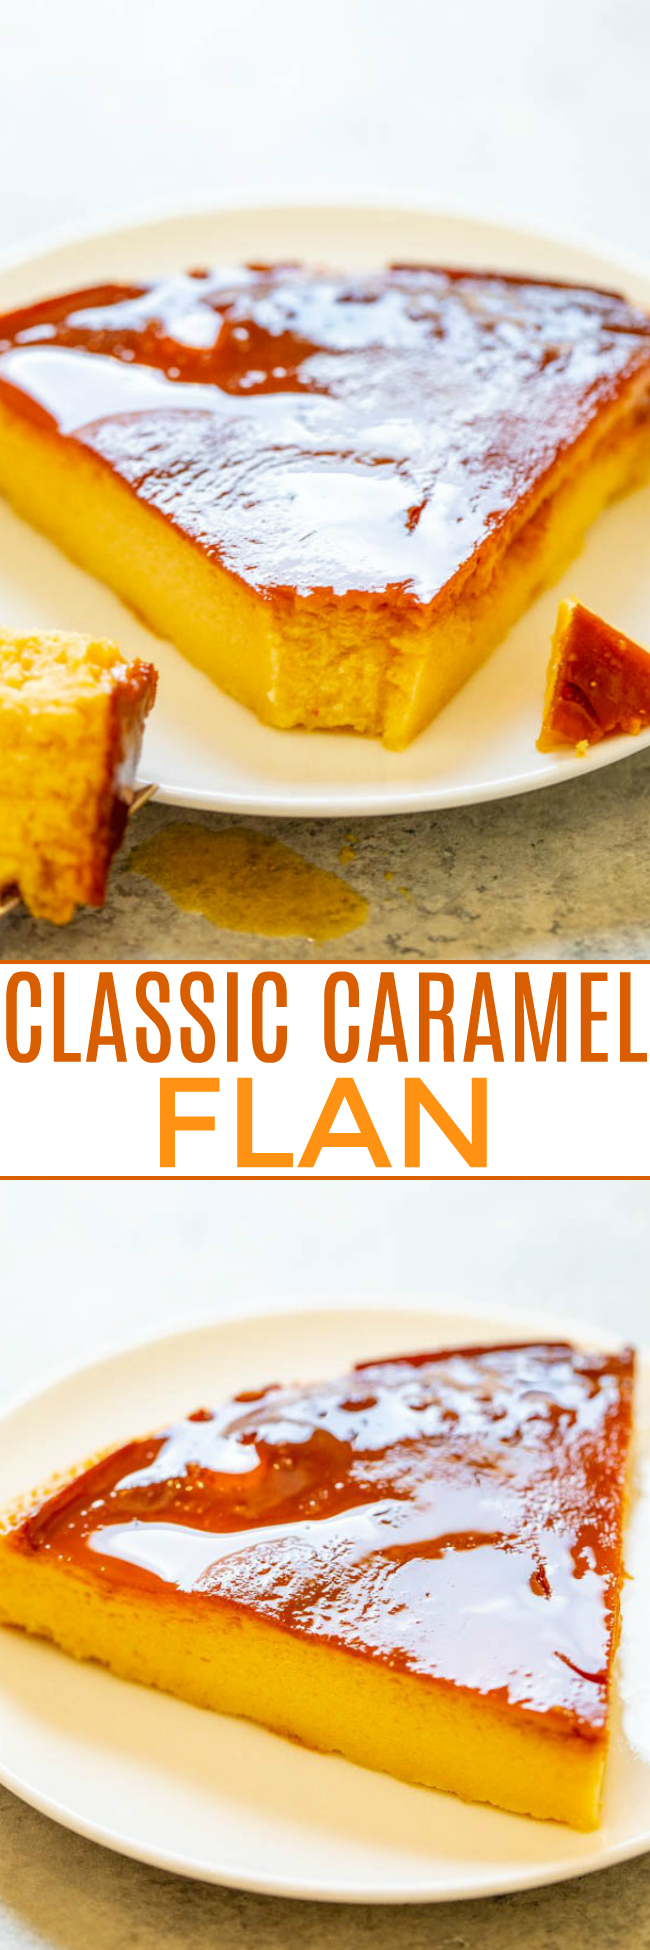 Classic Caramel Flan - If you've been scared to make what seems like a complicated dessert, don't worry!! This flan recipe is easy to follow and delivers delicate, TENDER, delicious flan with an IRRESISTIBLE caramel sauce!!